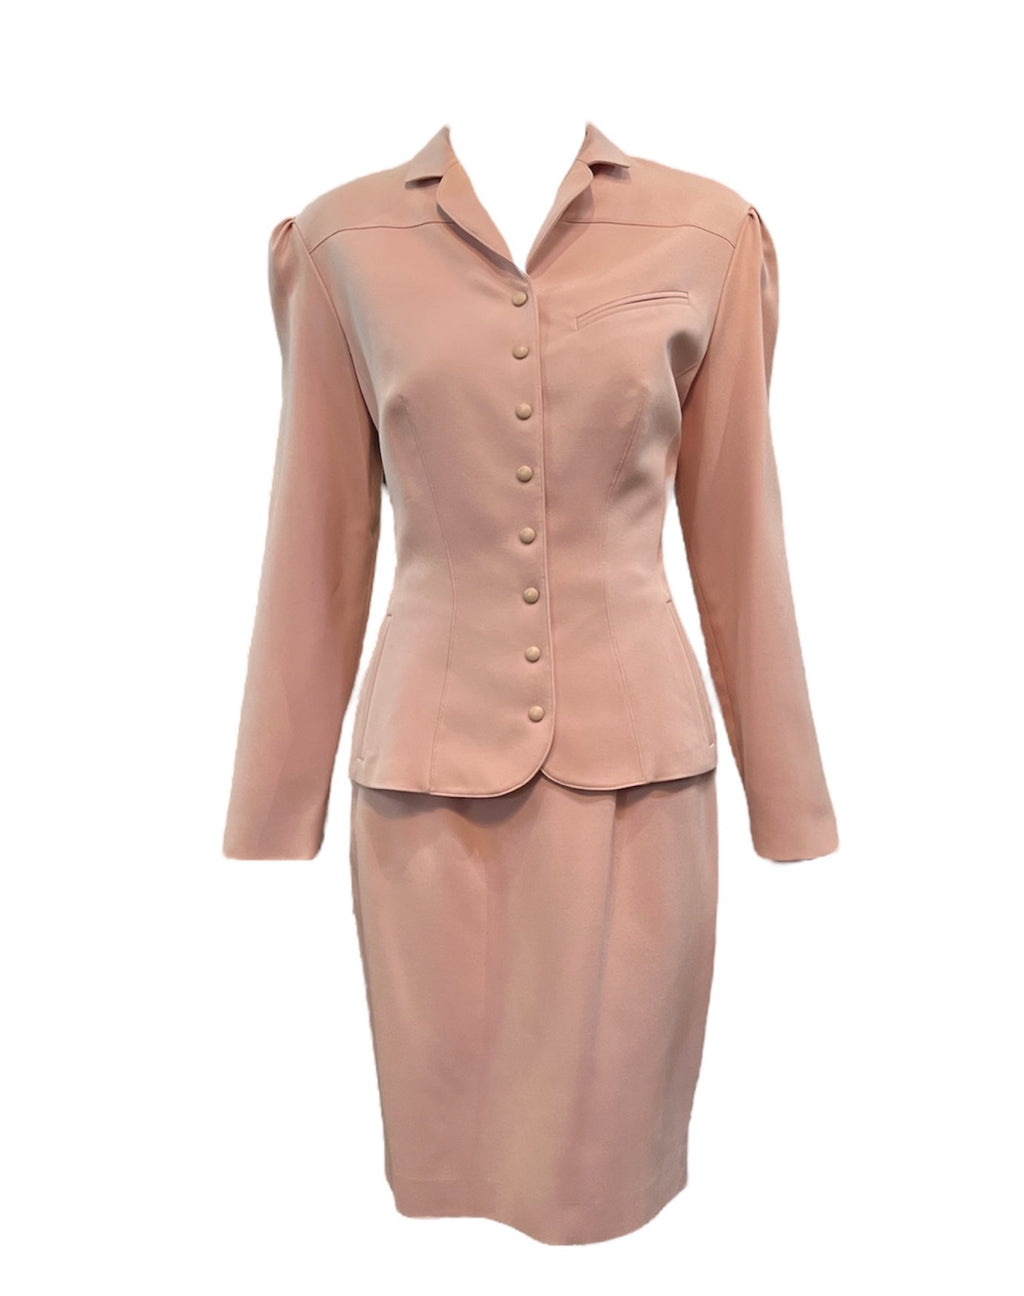 Thierry Mugler 90s Dusty Pink Skirt Suit FRONT 1 of 8